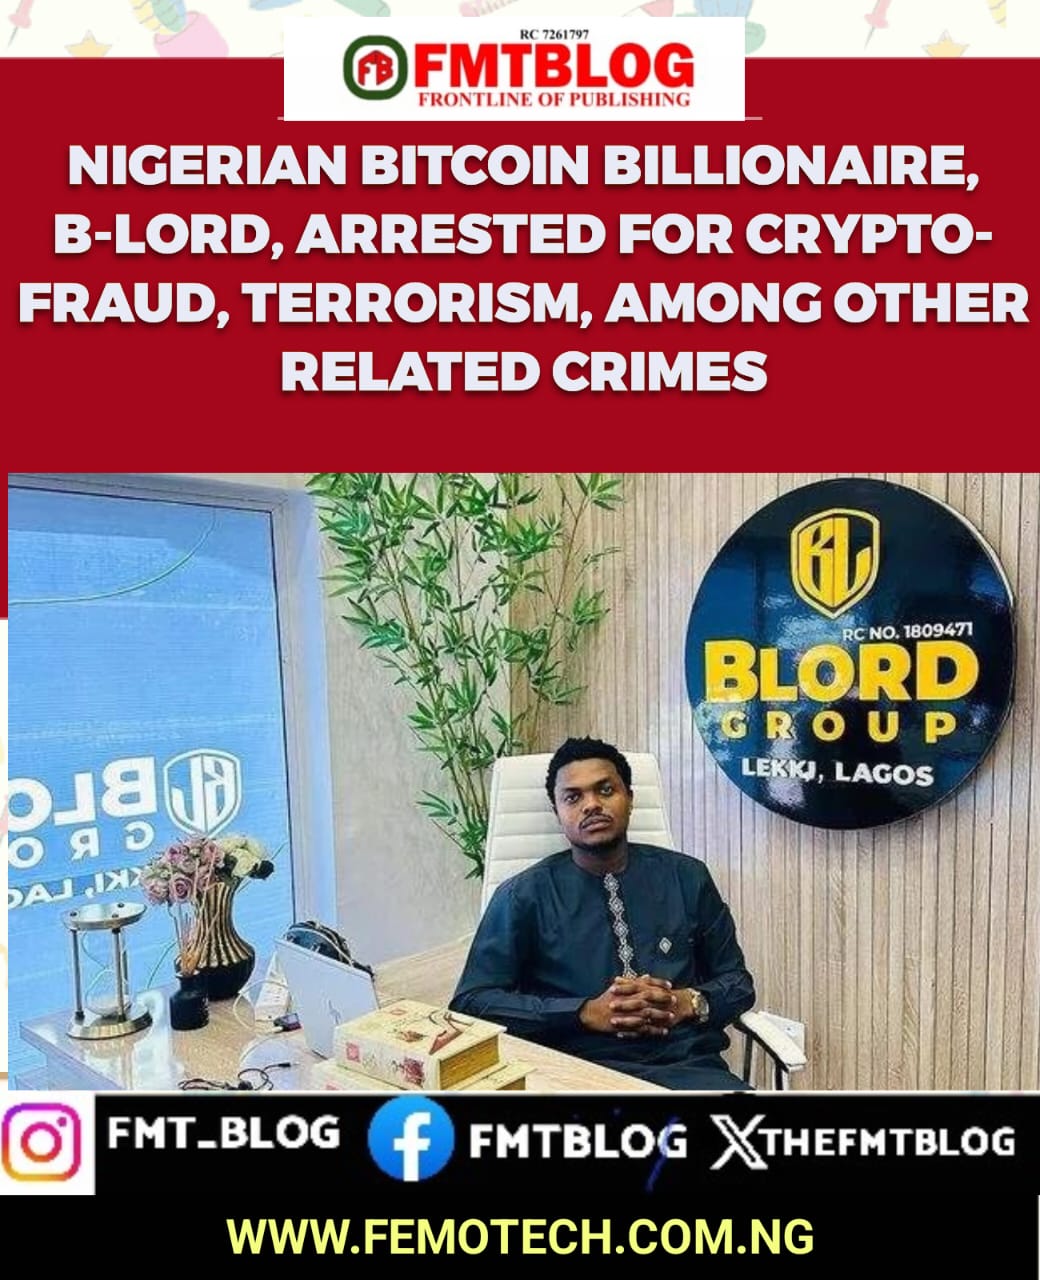 Nigerian Bitcoin Billionaire, B-Lord, Arrested For Crypto-Fraud, Terrorism Among Other Related Crimes